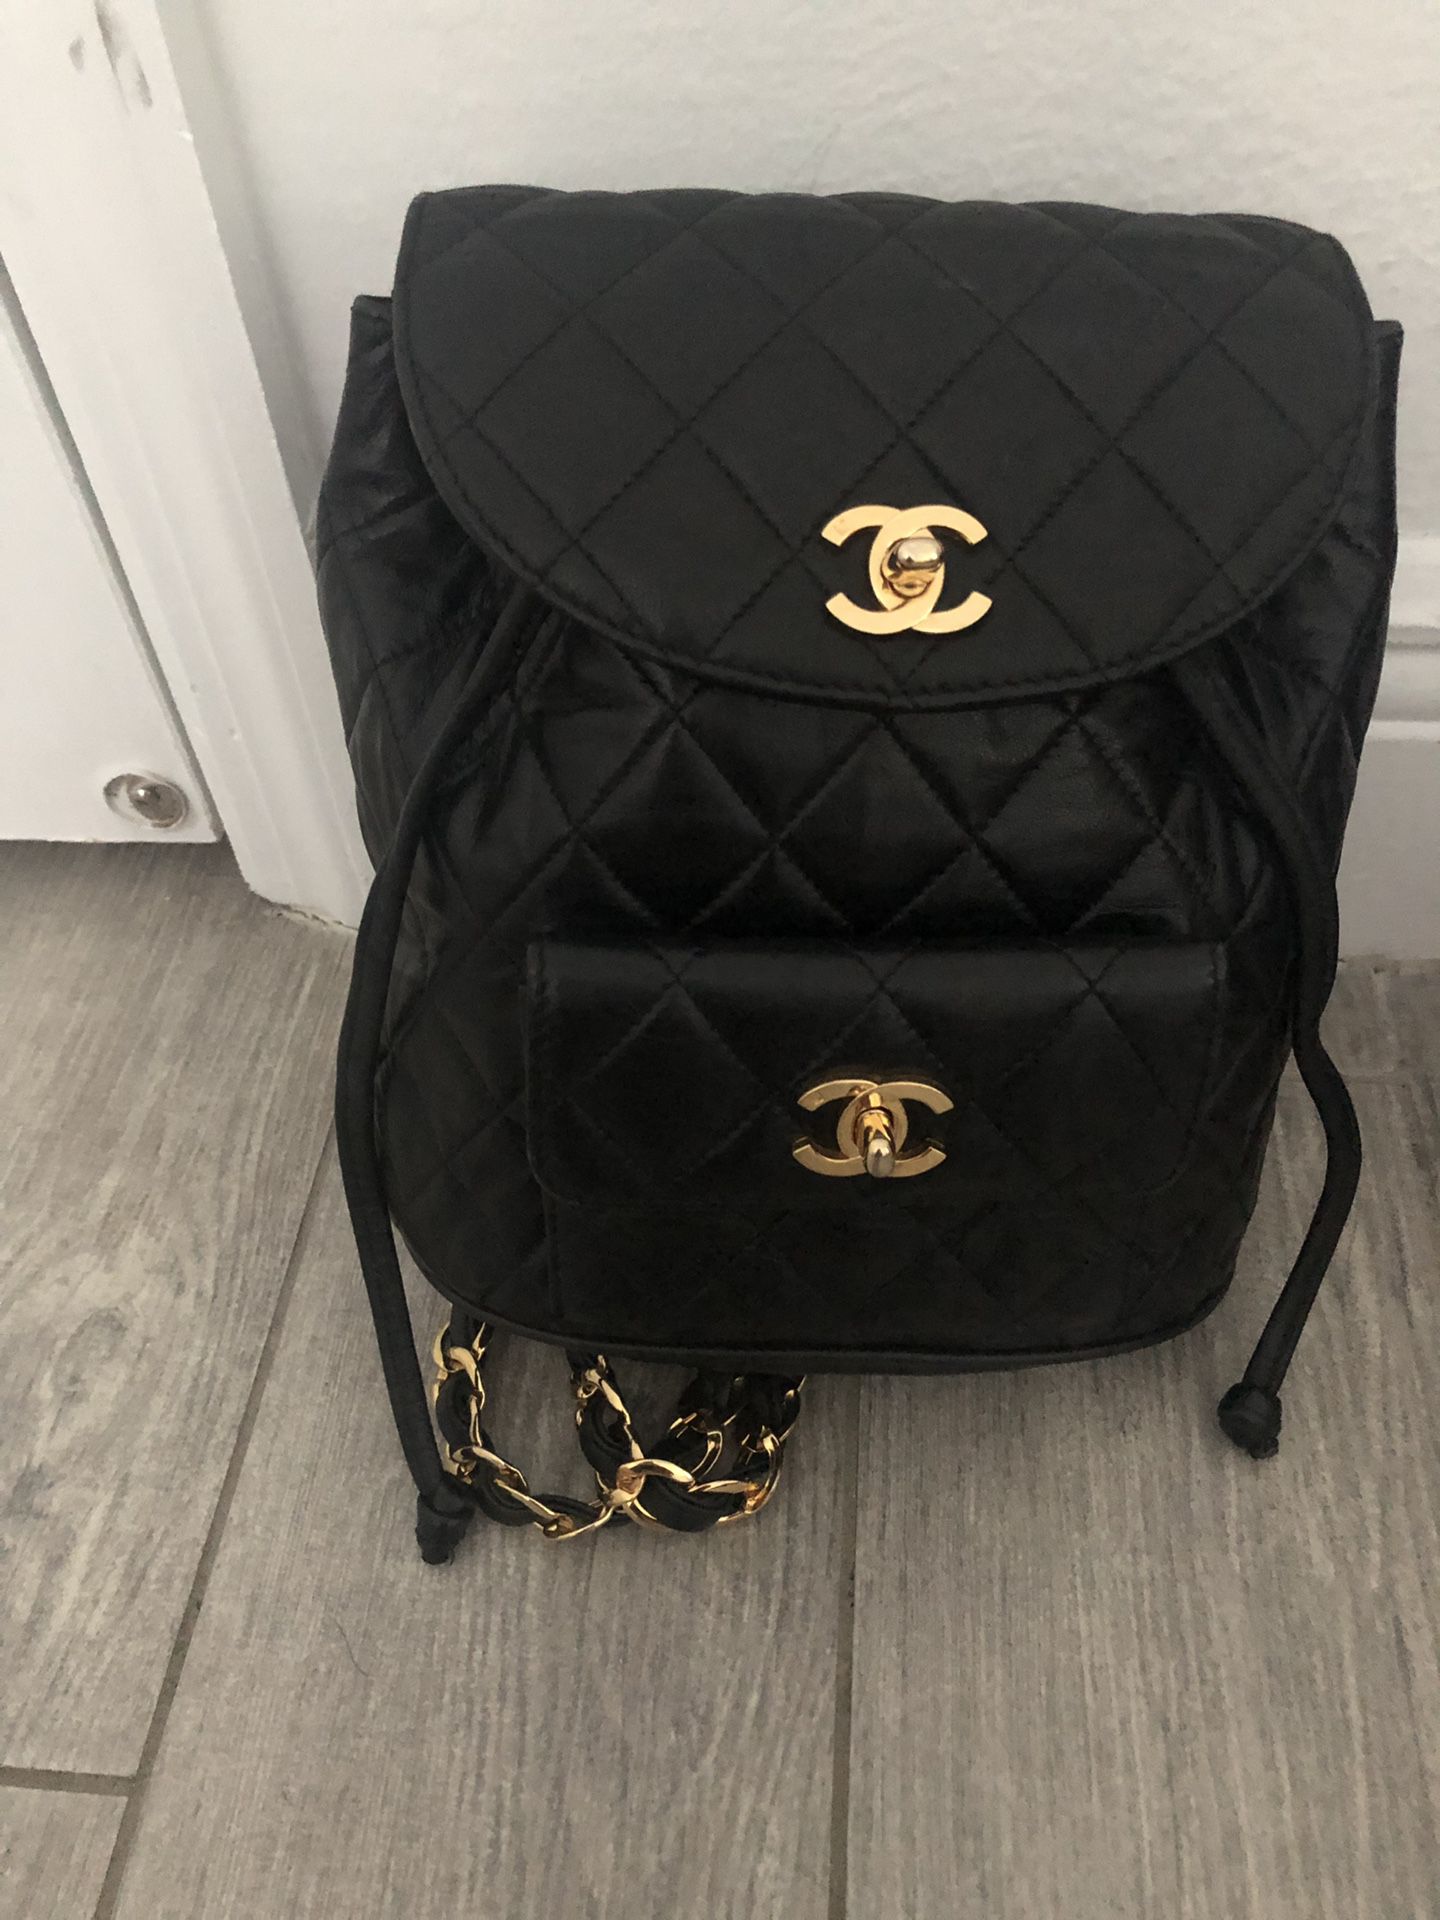 Chanel back pack (FOR MORE PICS)